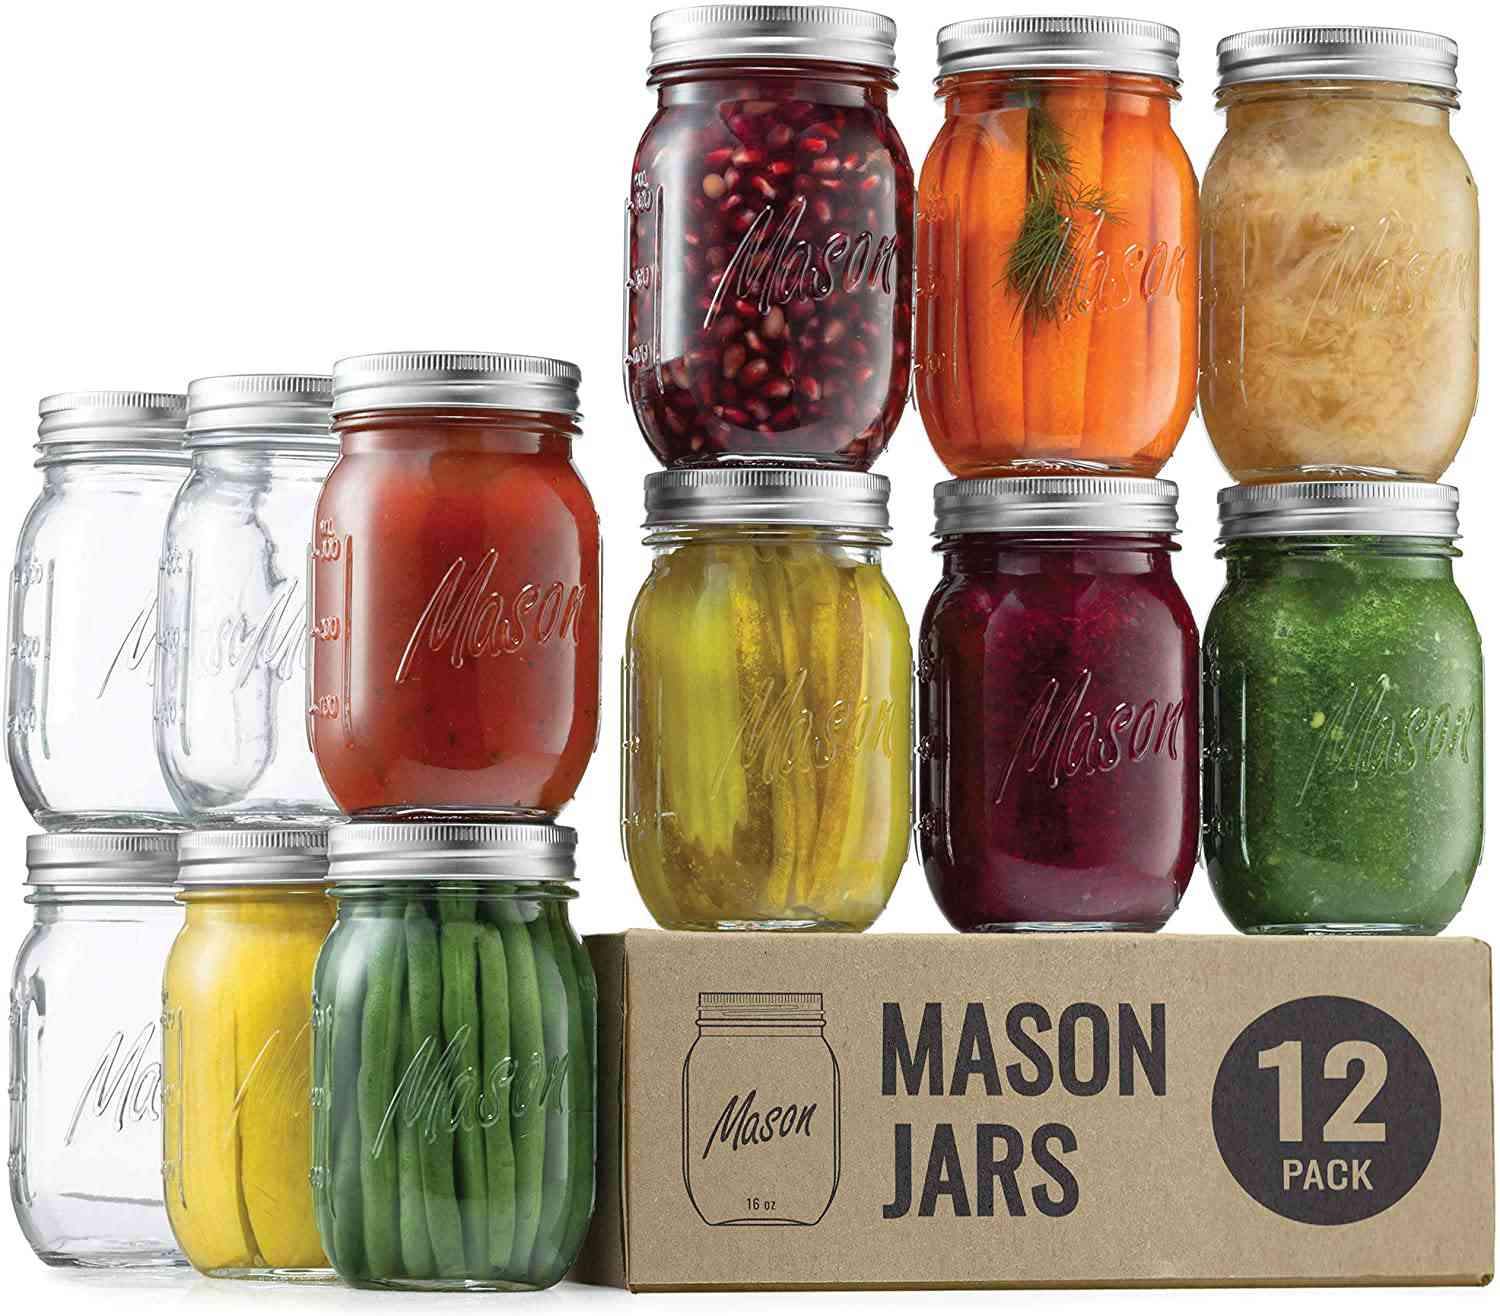 Side-by-side comparison of a canning jar and a mason jar